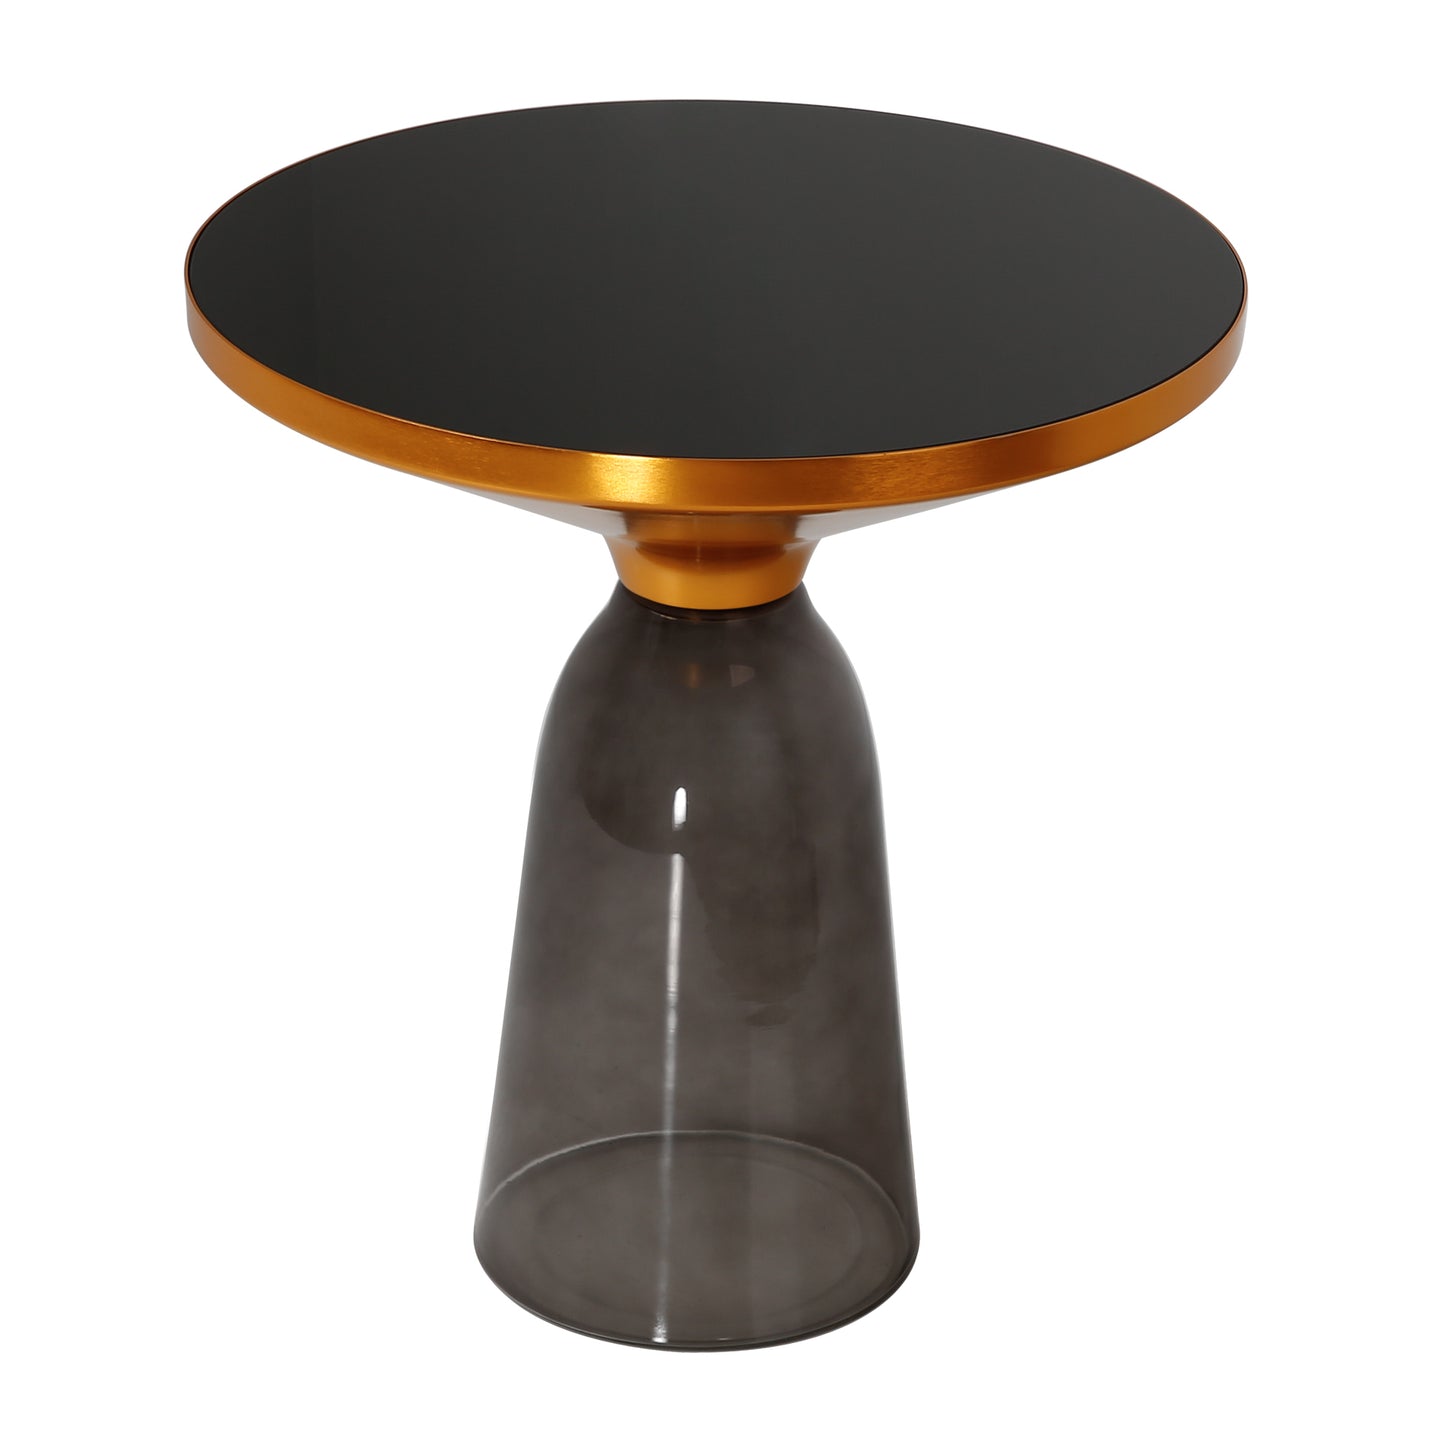 Bell coffee table and side table 3 colour in stock!